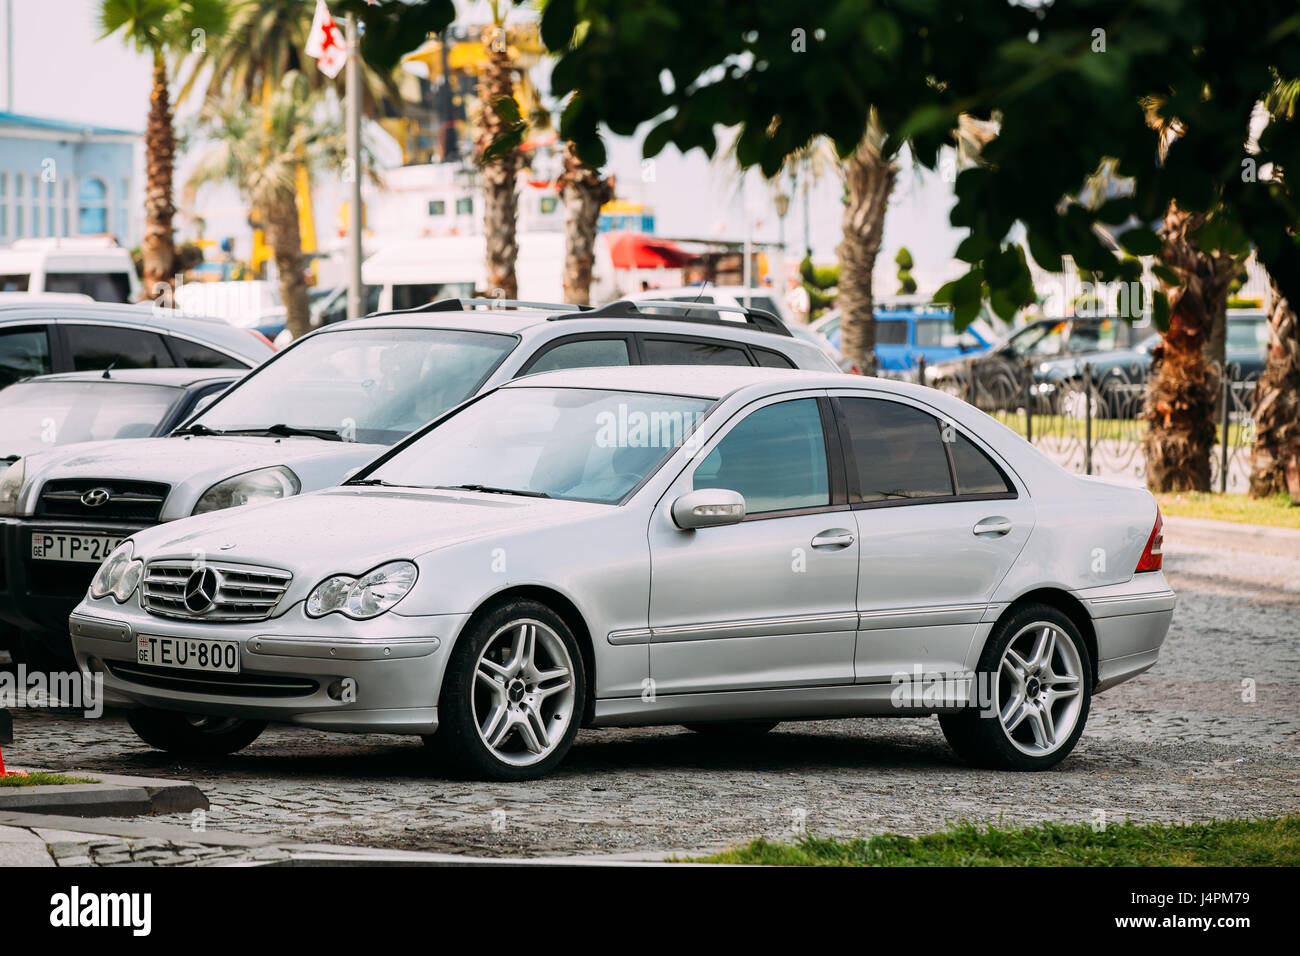 mercedes c class diesel w203 used – Search for your used car on the parking